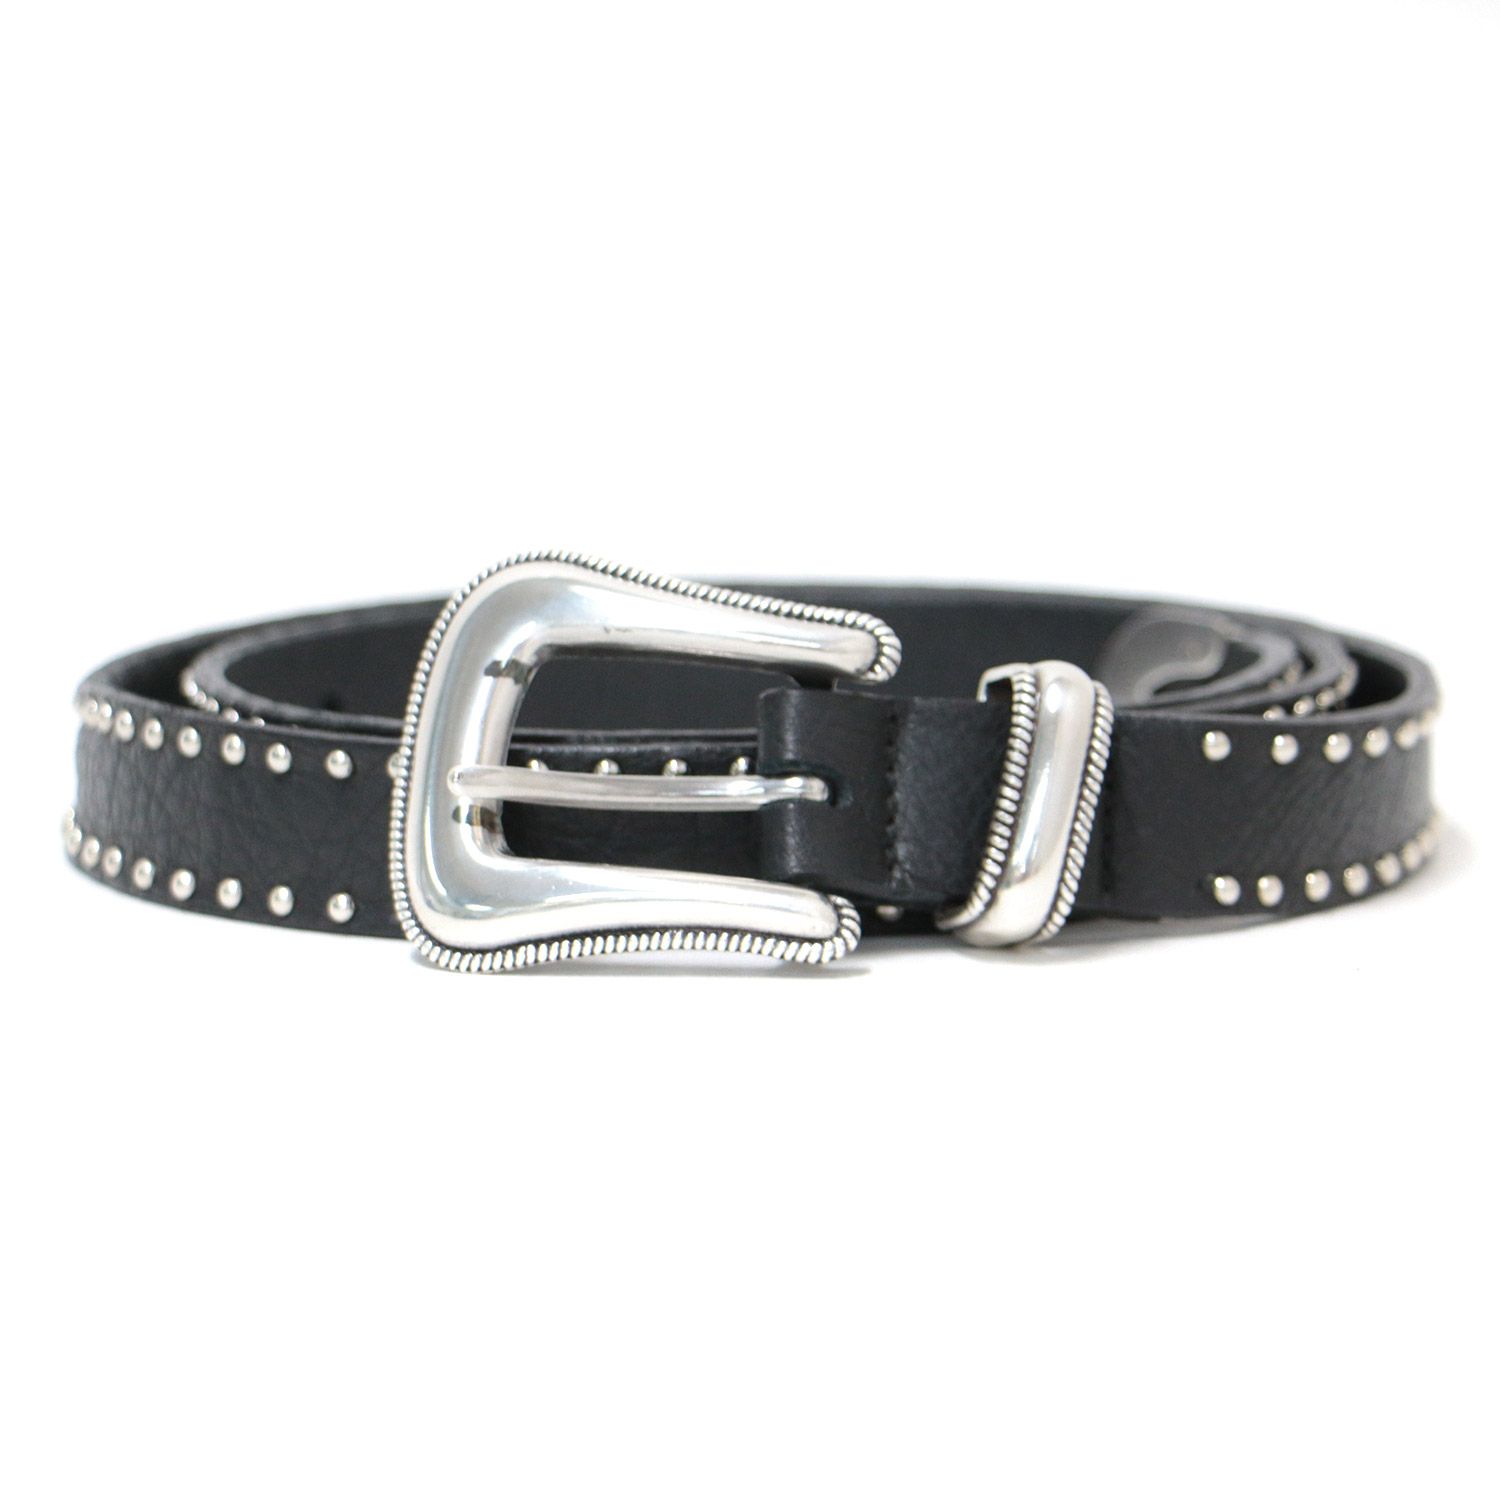 Designer leather belts and foundational fashion accessories – B